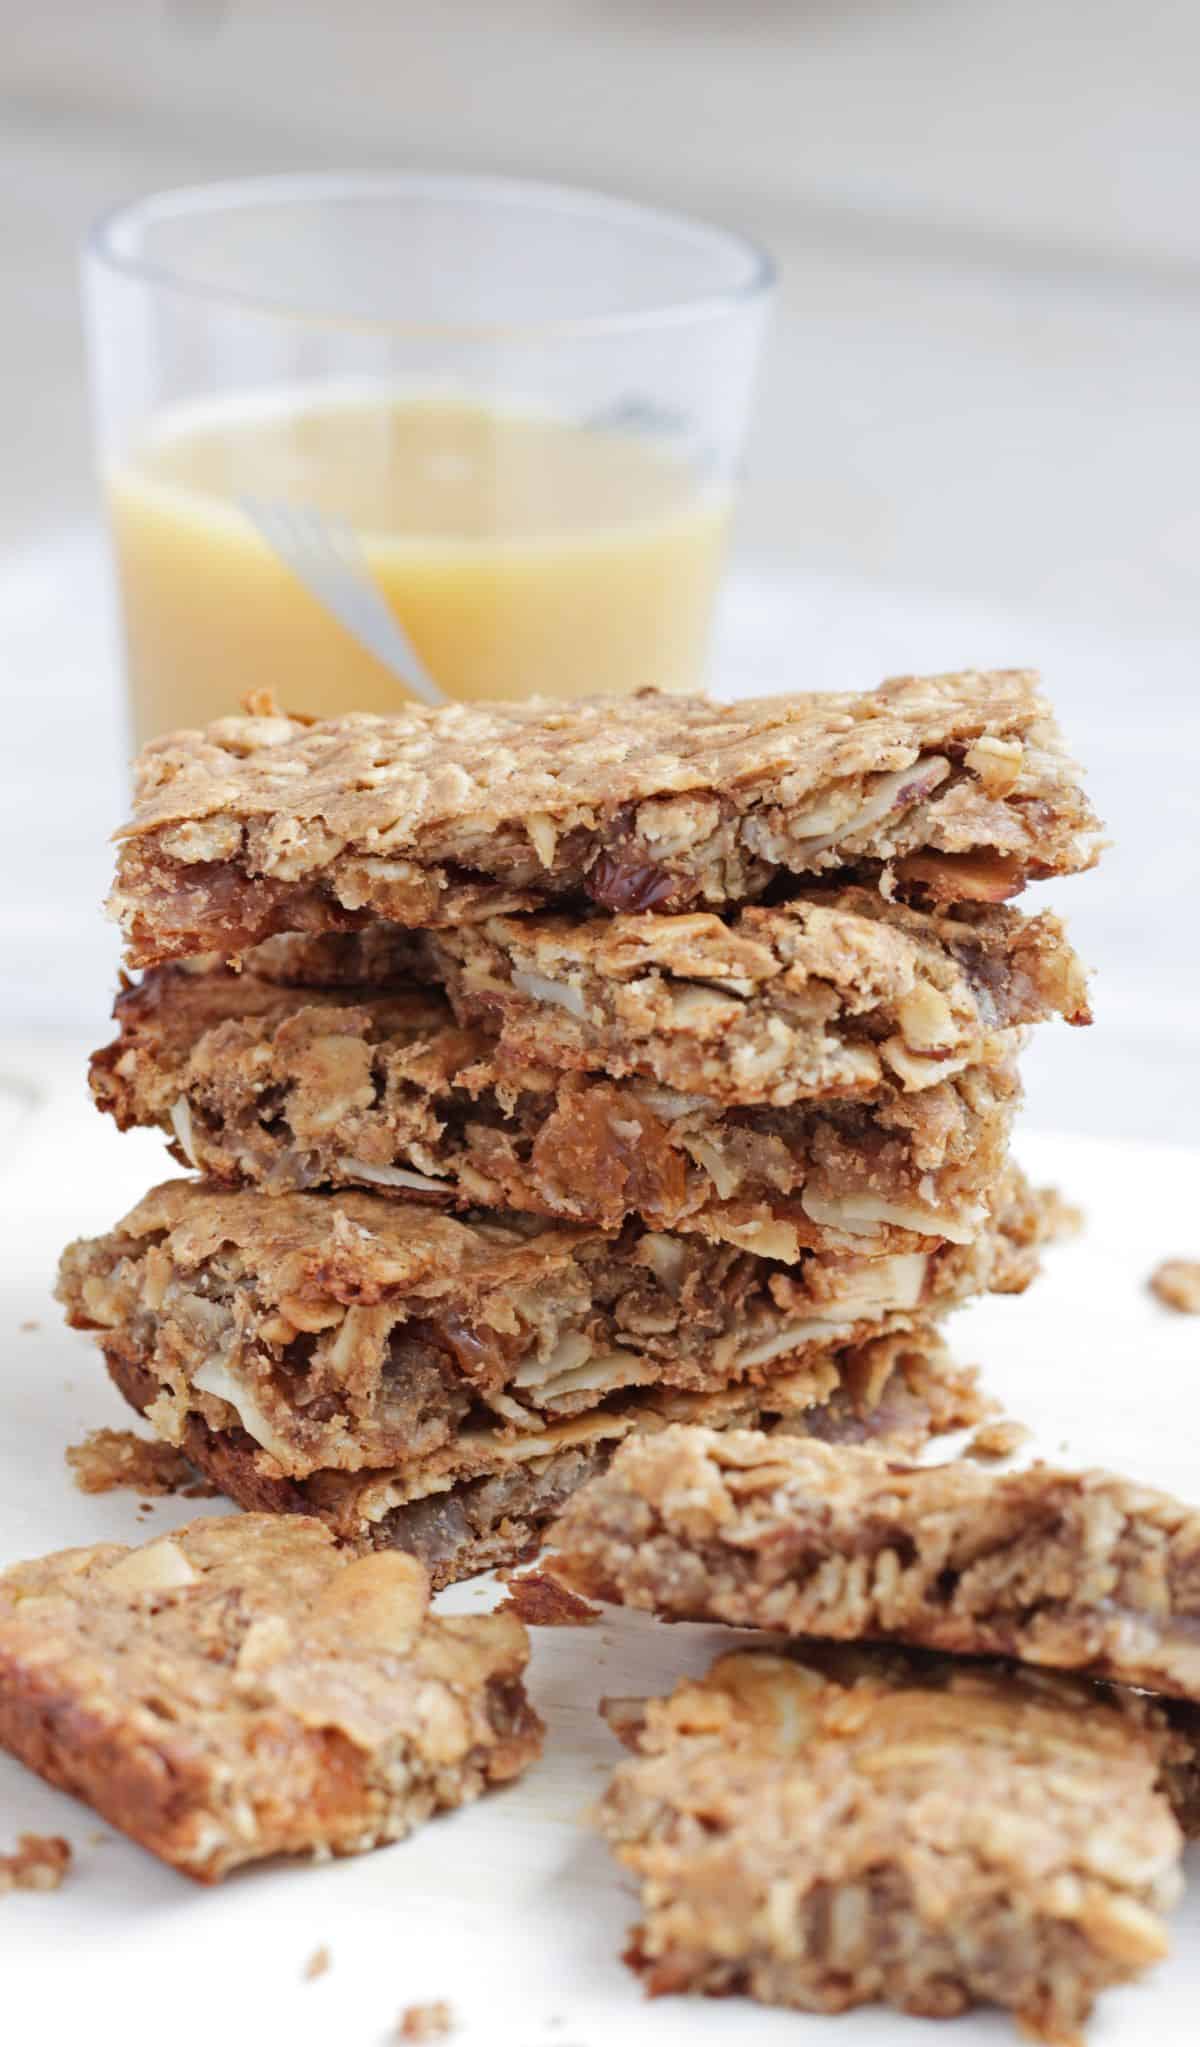 Banana oatmeal bar stacked with orange juice in the background